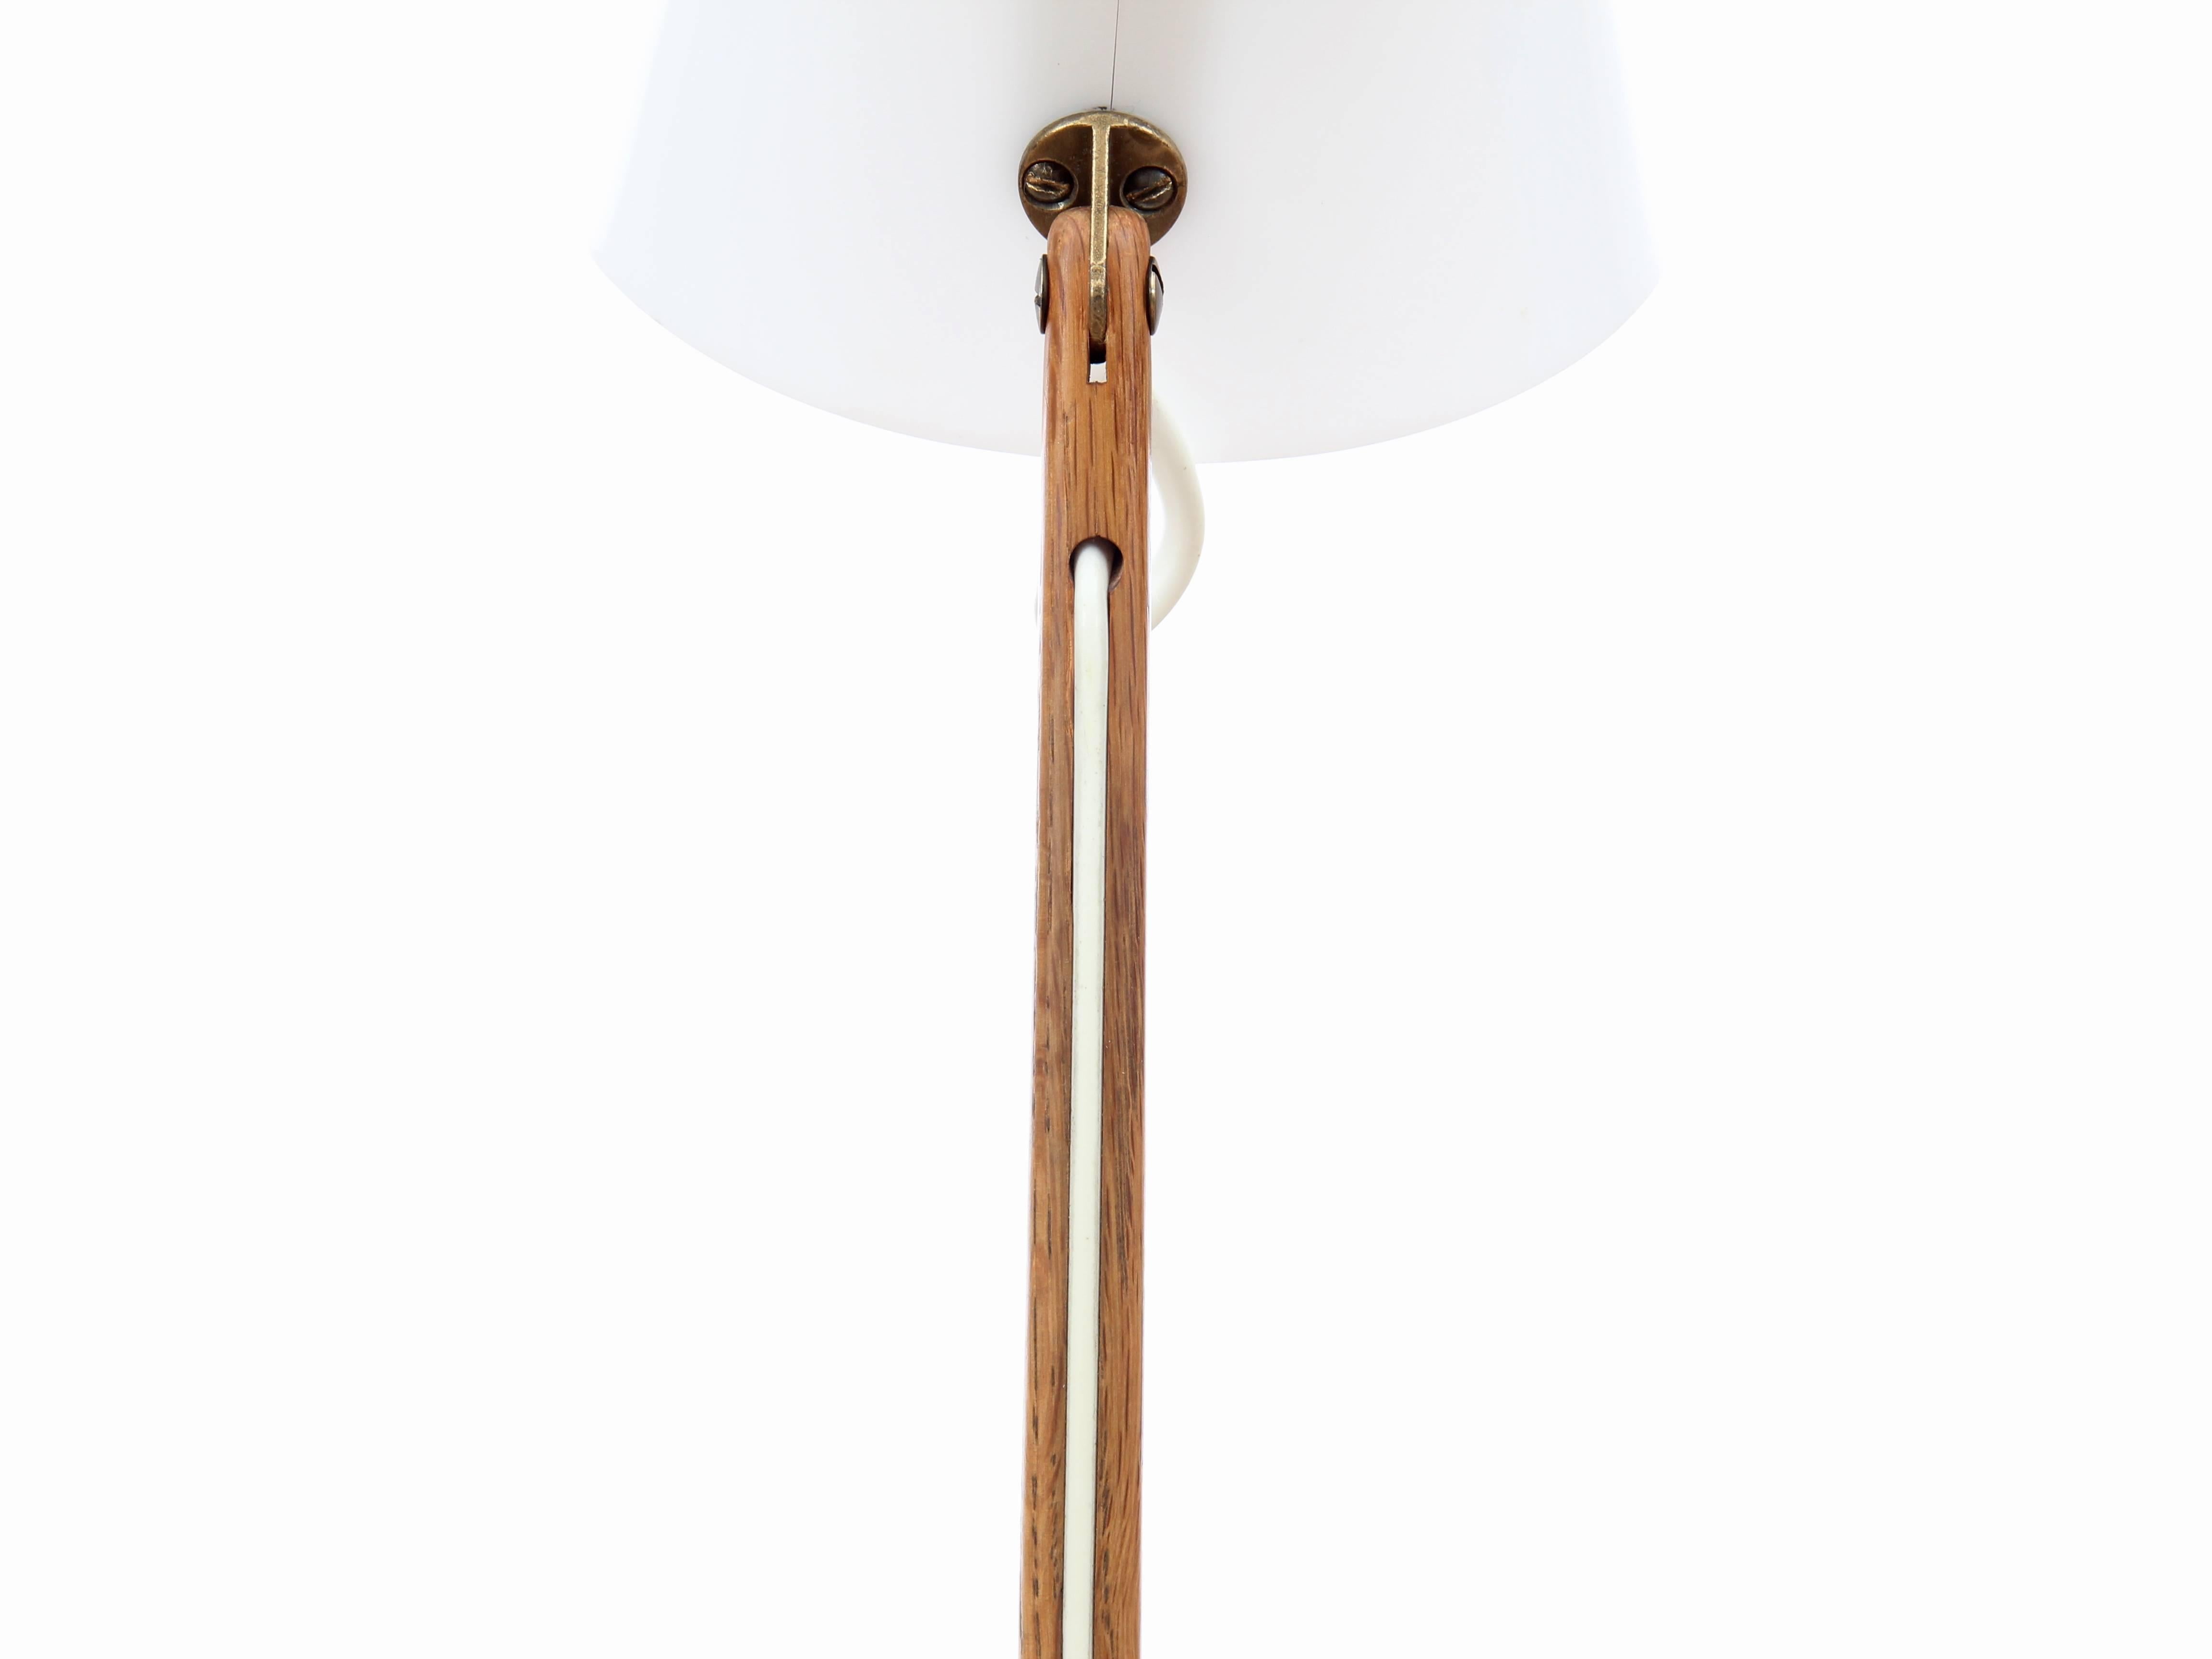 Acrylic Mid-Century Modern Small Floor Lamp by Uno & Osten Kristiansson for Luxus